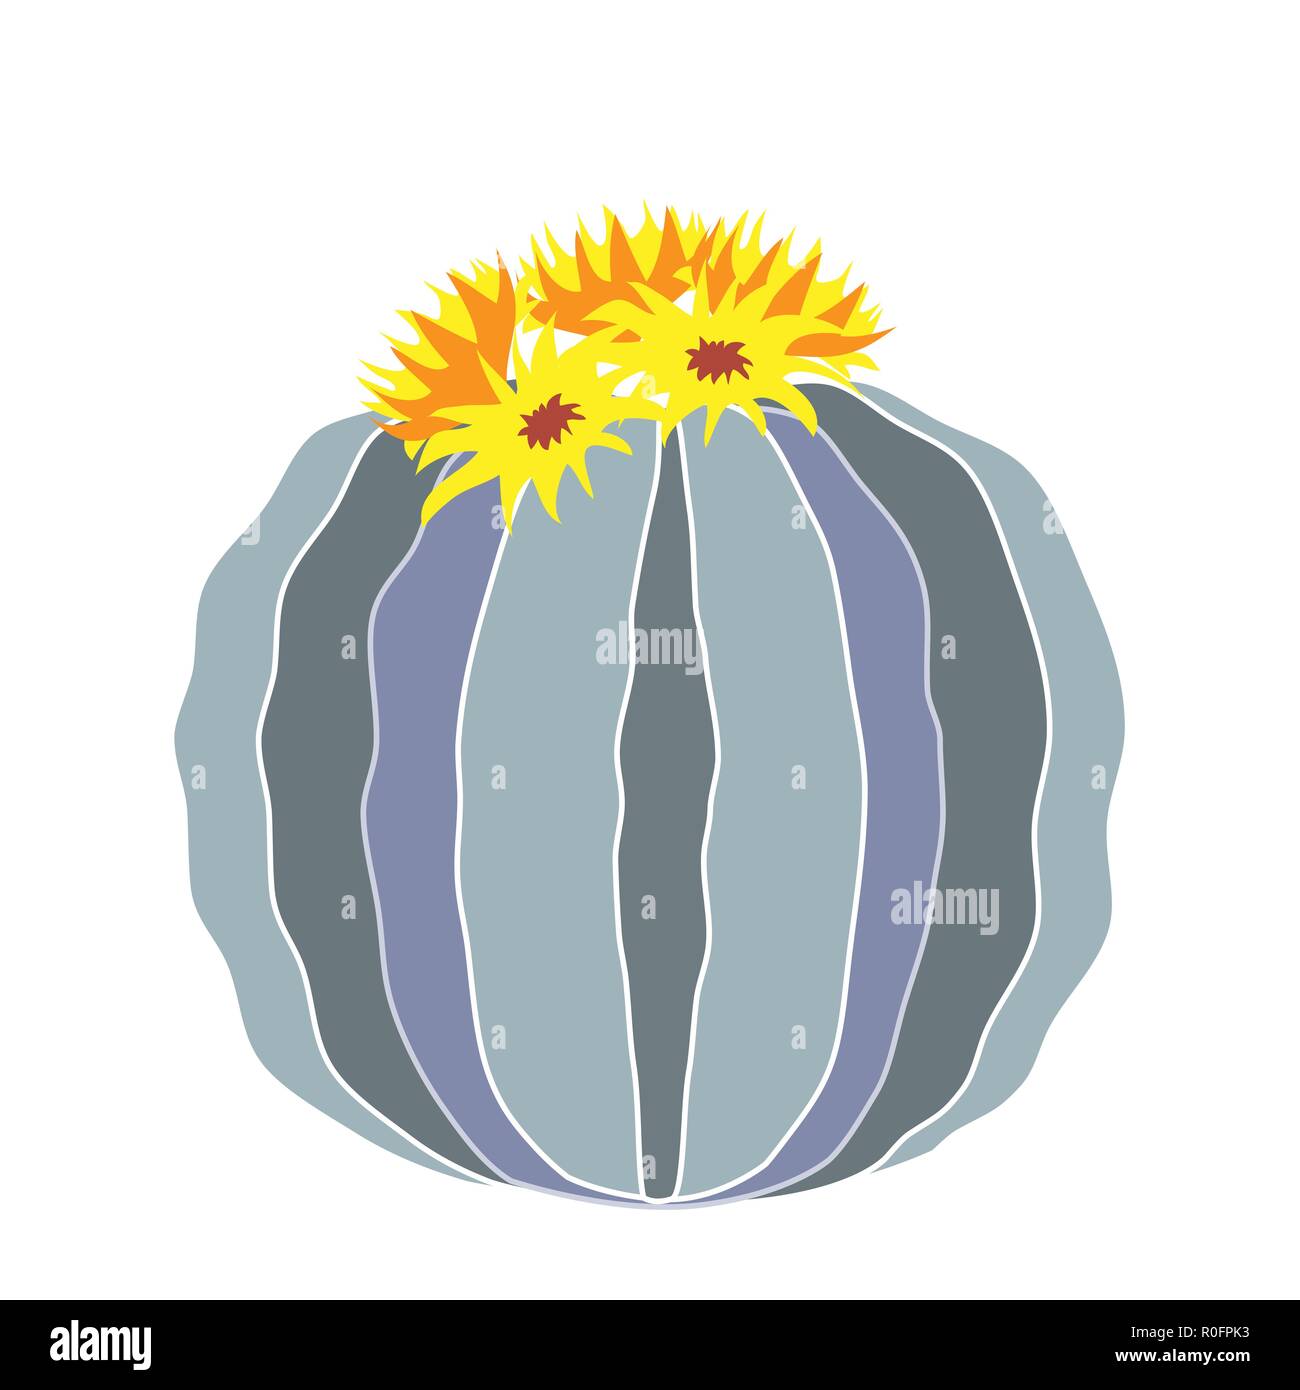 Cartoon illustration of round cactus. Isolated vector. Stock Vector